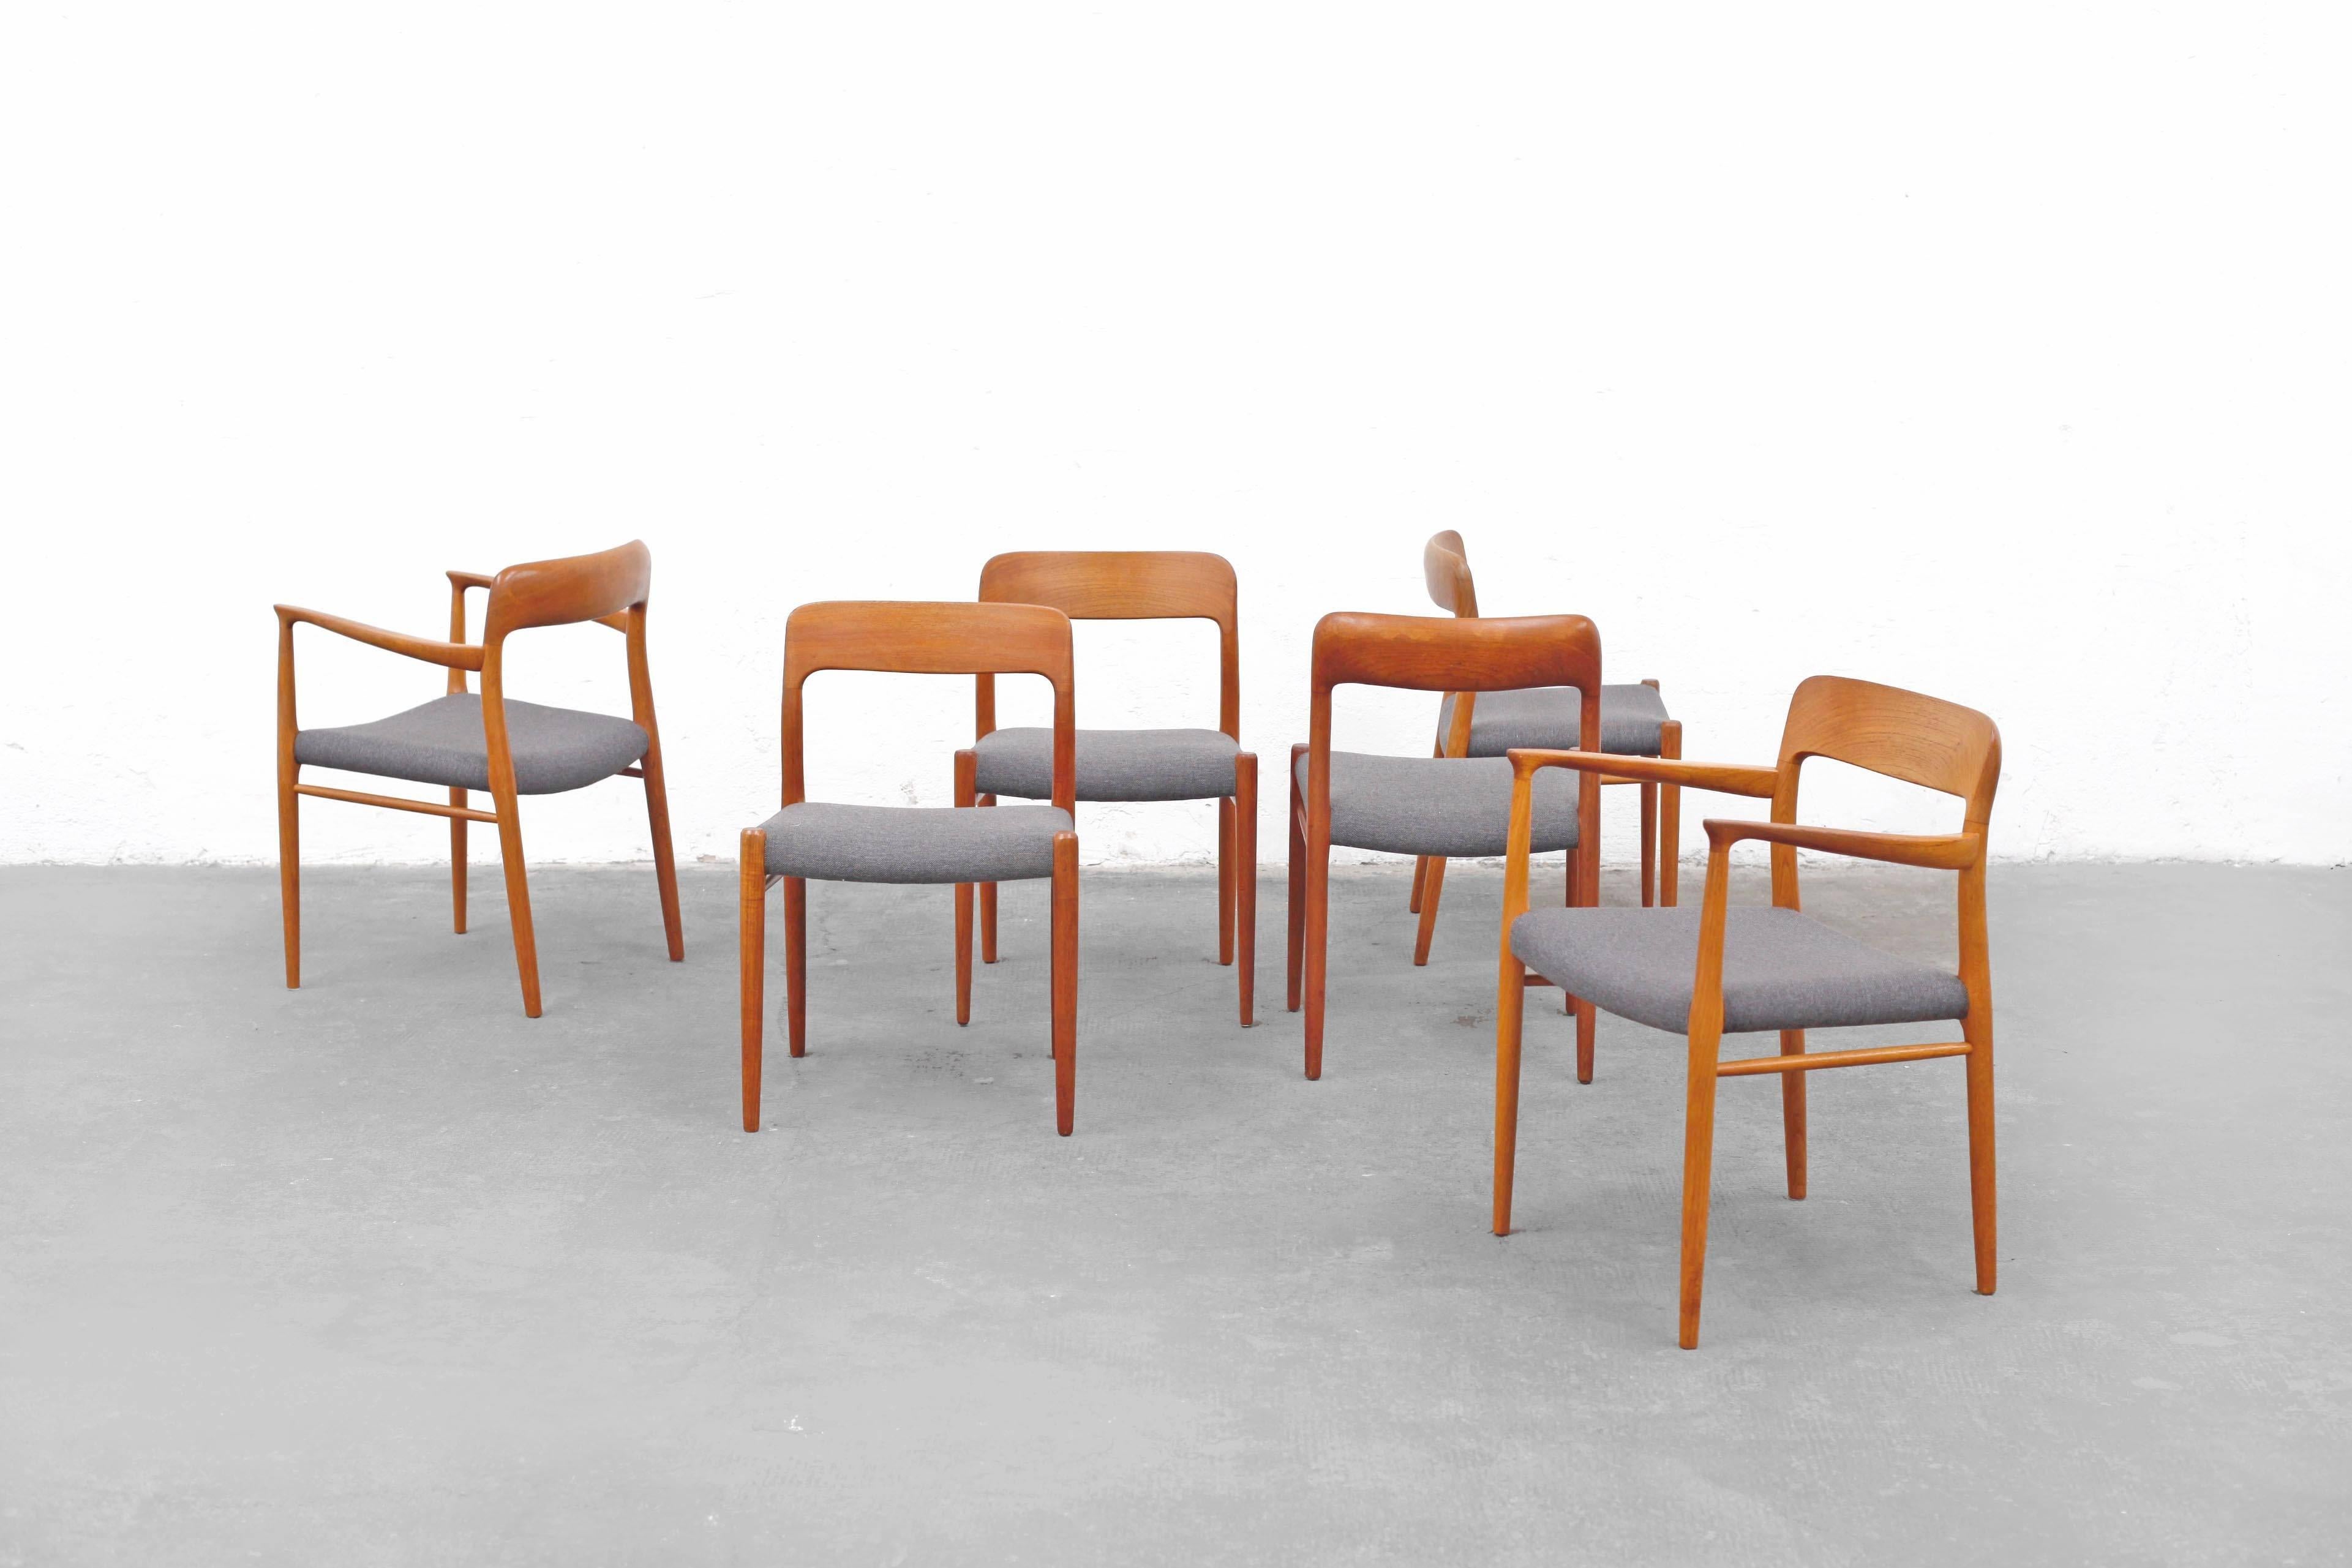 20th Century Teak Dining Chair Set by Niels O. Moeller No. 75 and No. 56